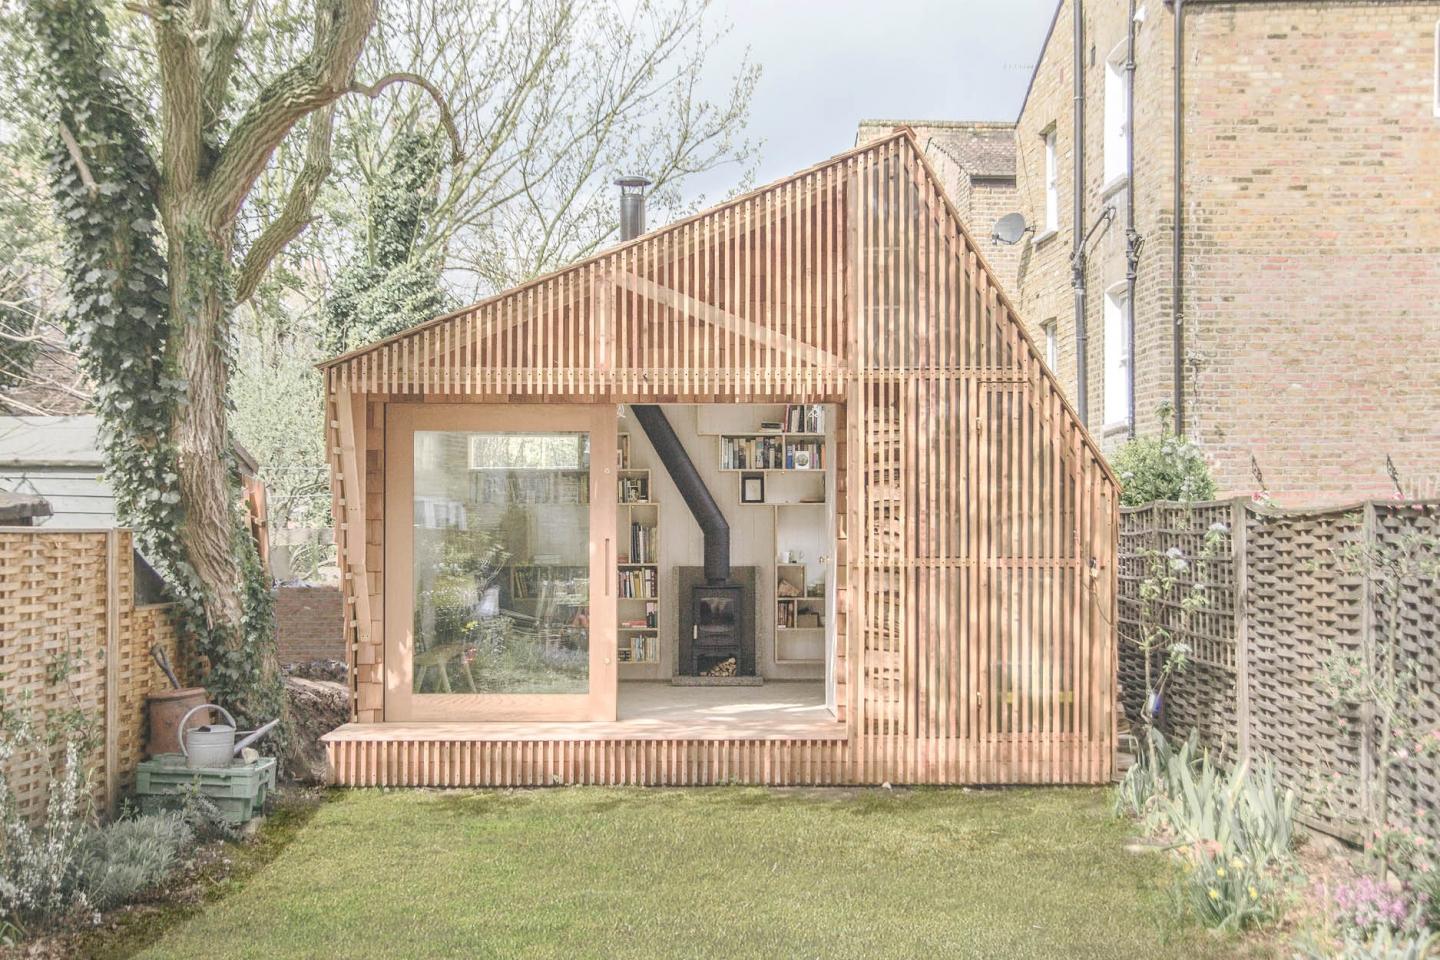 Weston Surman & Deane Architecture’s Writer’s Shed is a shining example of how satellite micro-spaces can offer respite from contemporary city living